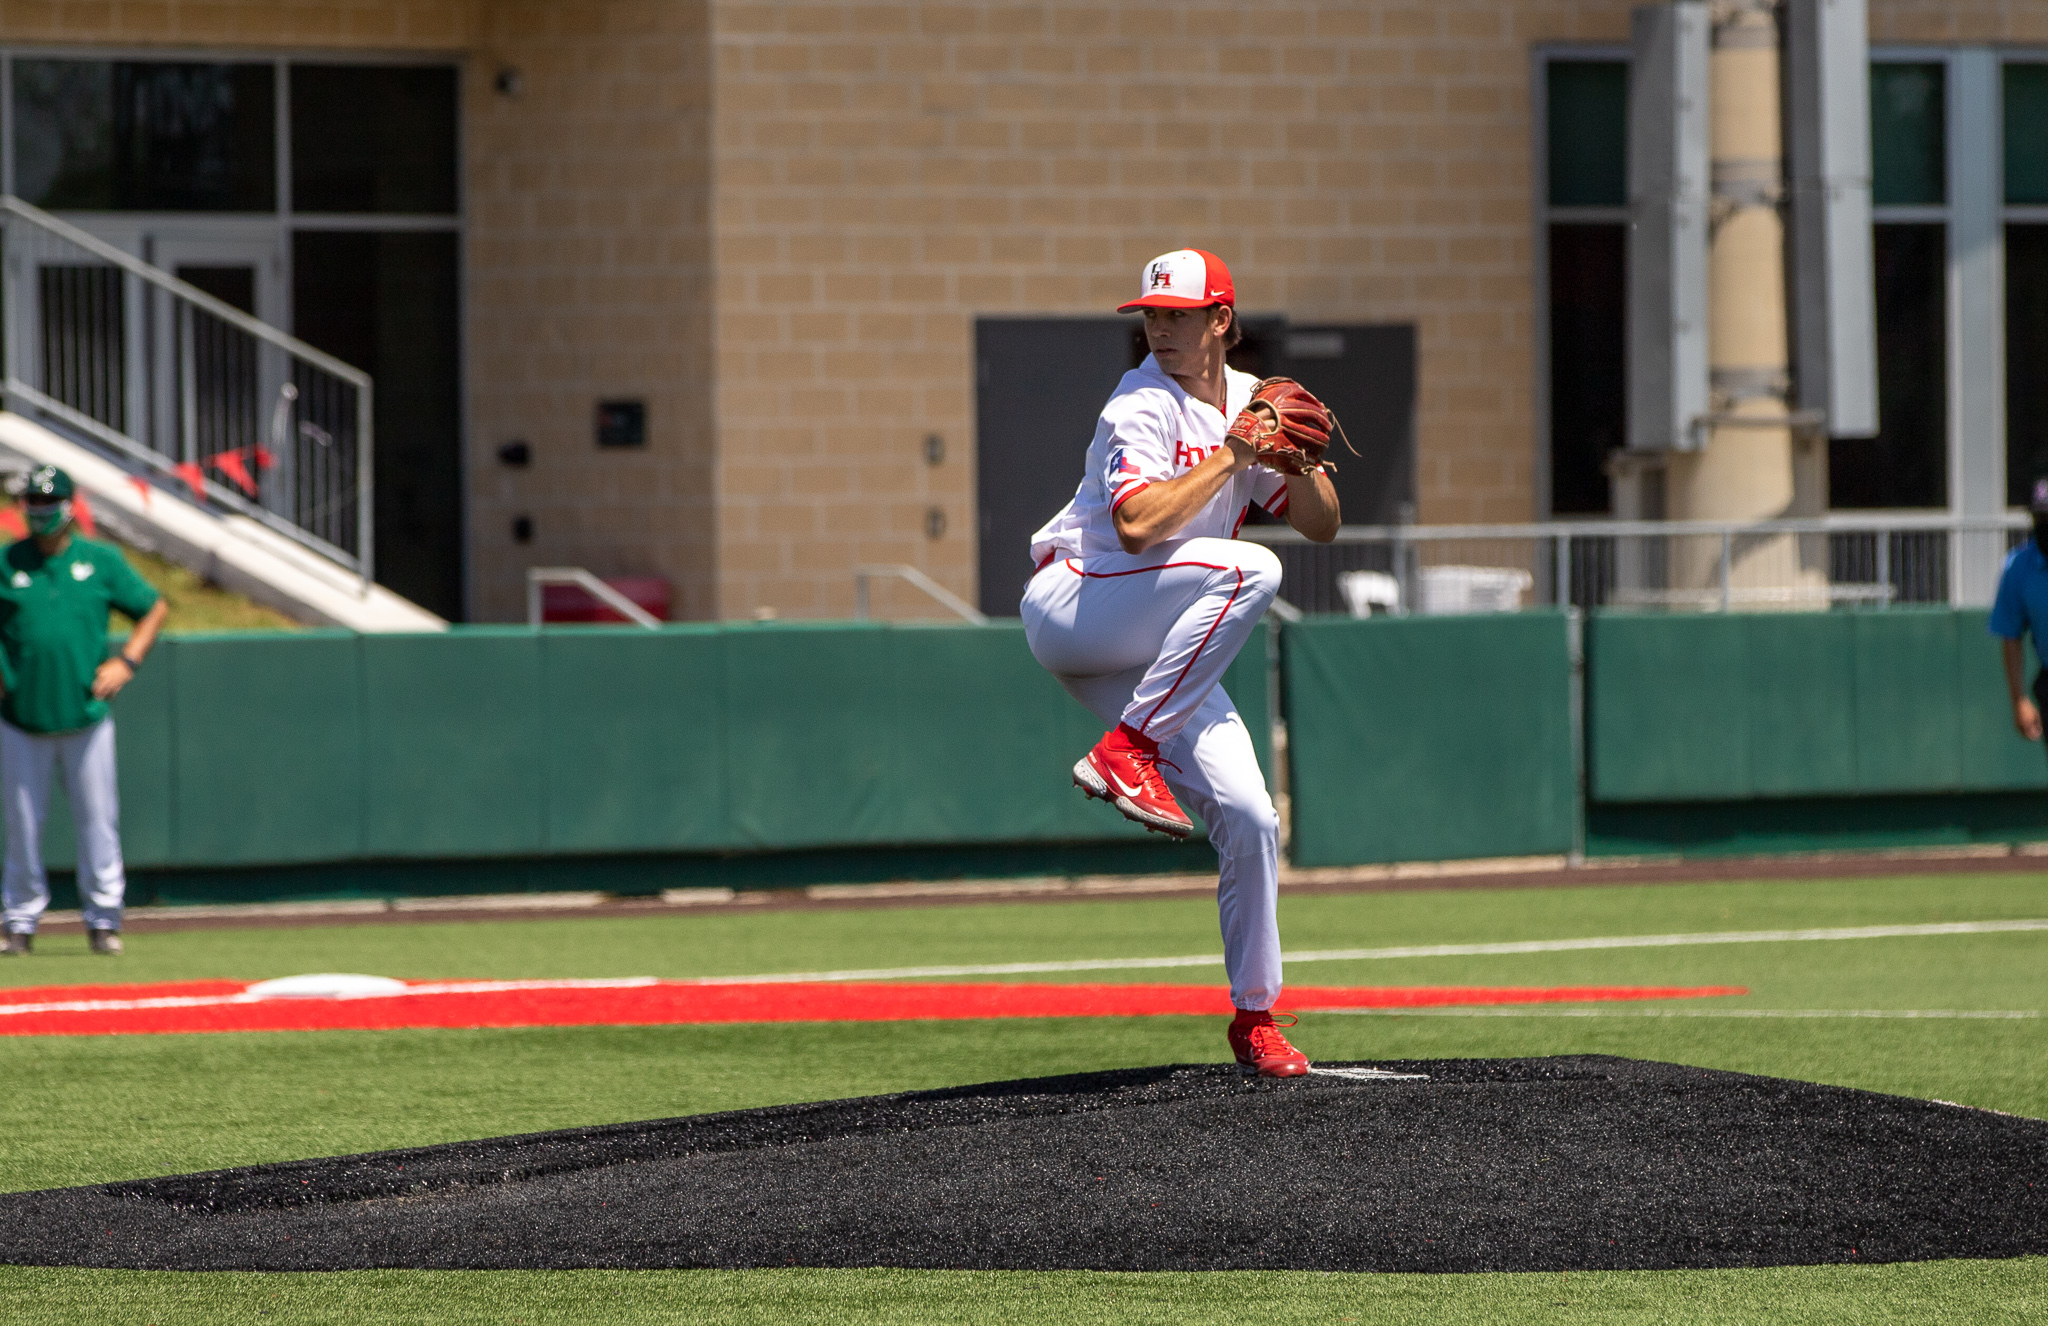 Junior left-hander Robert Gasser earned his sixth win of the year, throwing seven innings allowing no earned runs and striking out 10 to power UH baseball to victory in its series opener against Memphis. | Andy Yanez/The Cougar